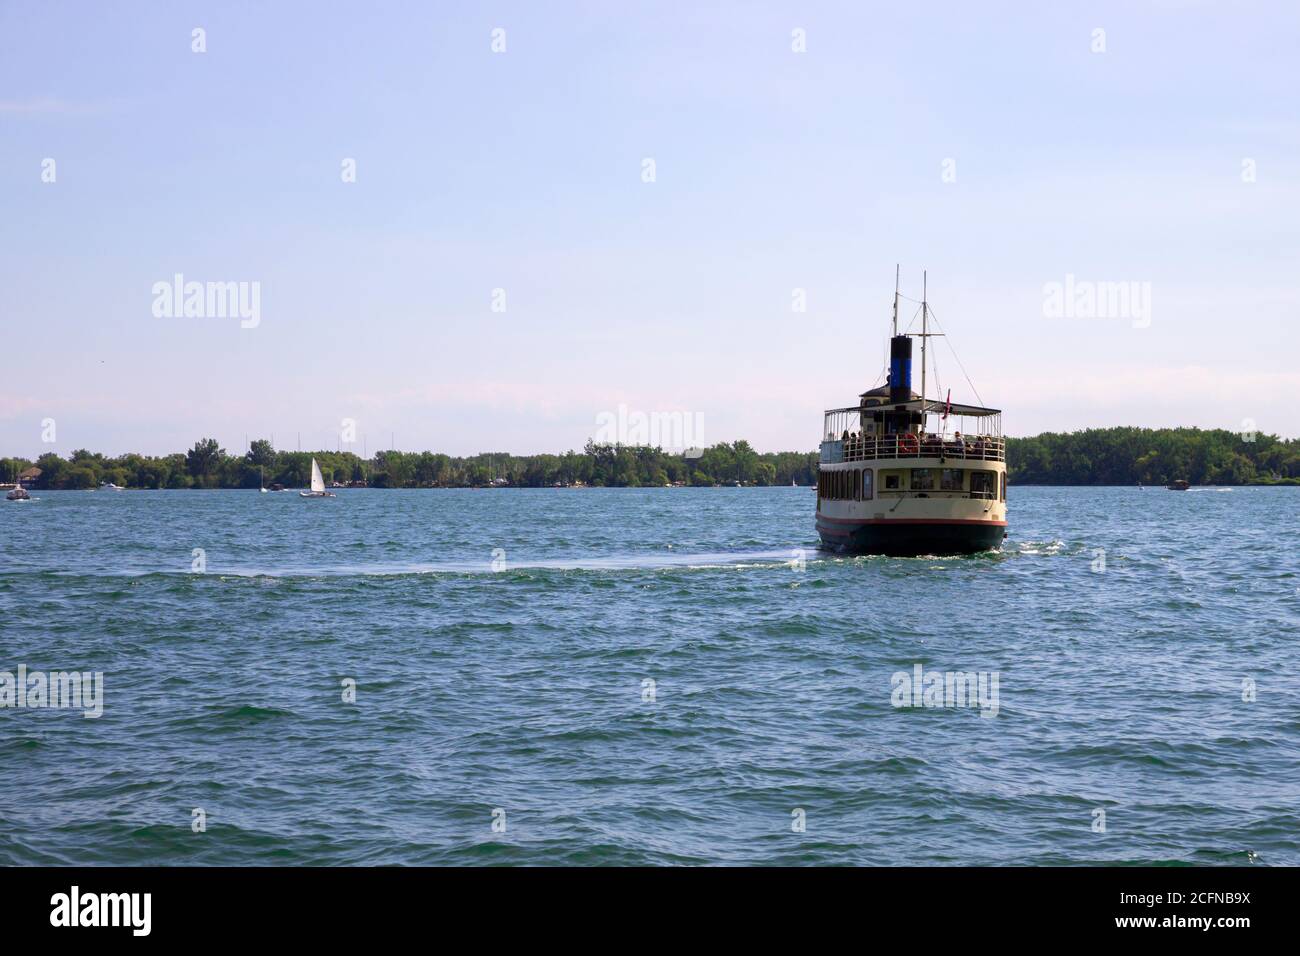 Vintage steamer ship departing from harbor Stock Photo